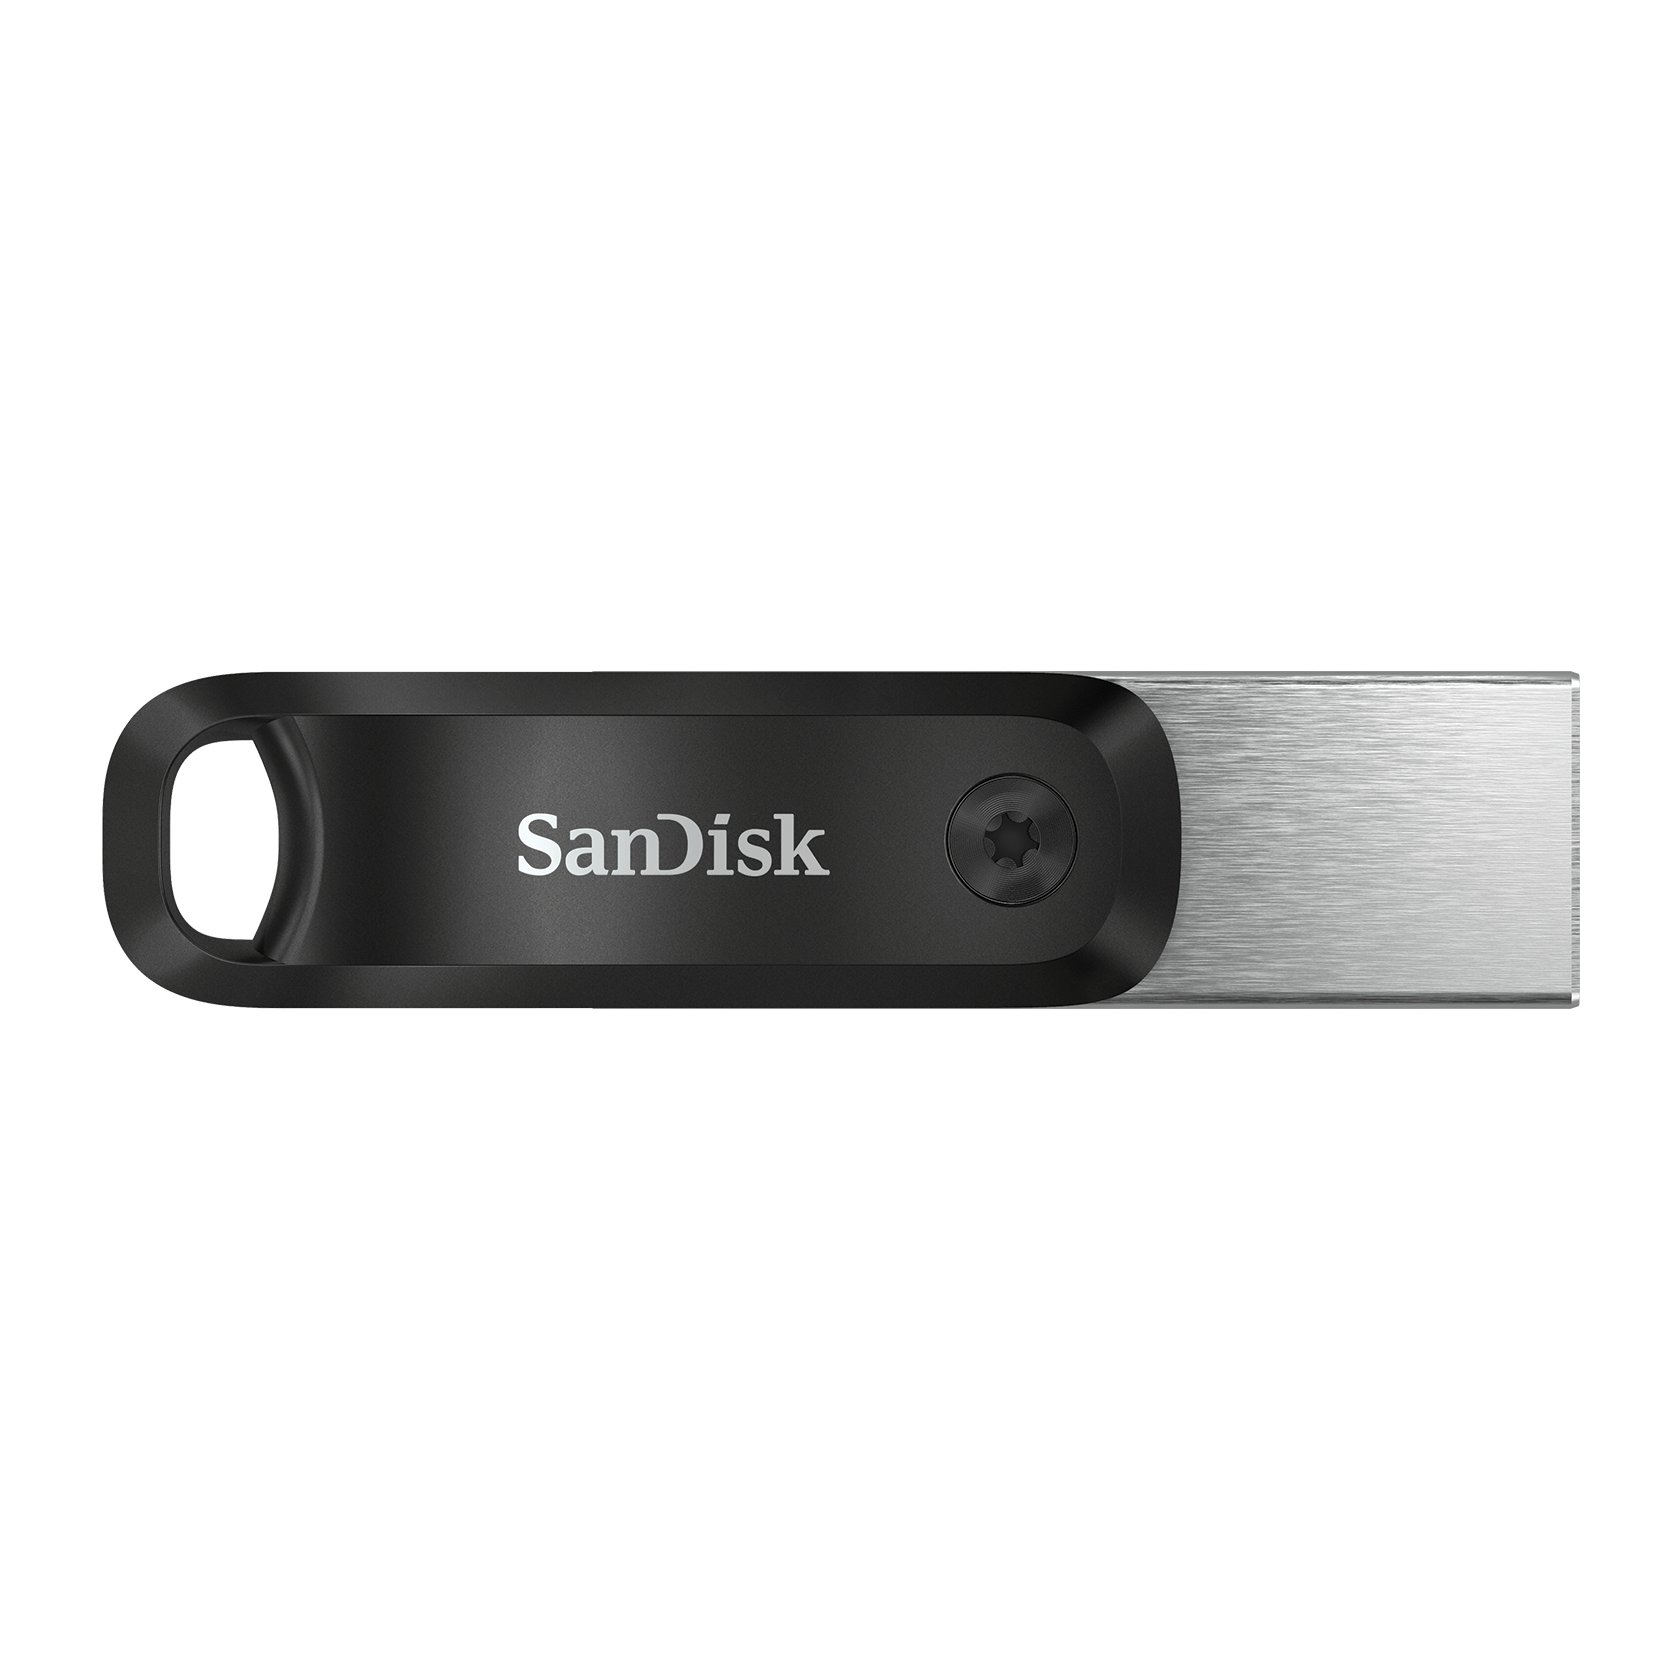 SanDisk 256GB iXpand Flash Drive Go, for iPhone and iPad - SDIX60N-256G-GN6NE - image 3 of 8